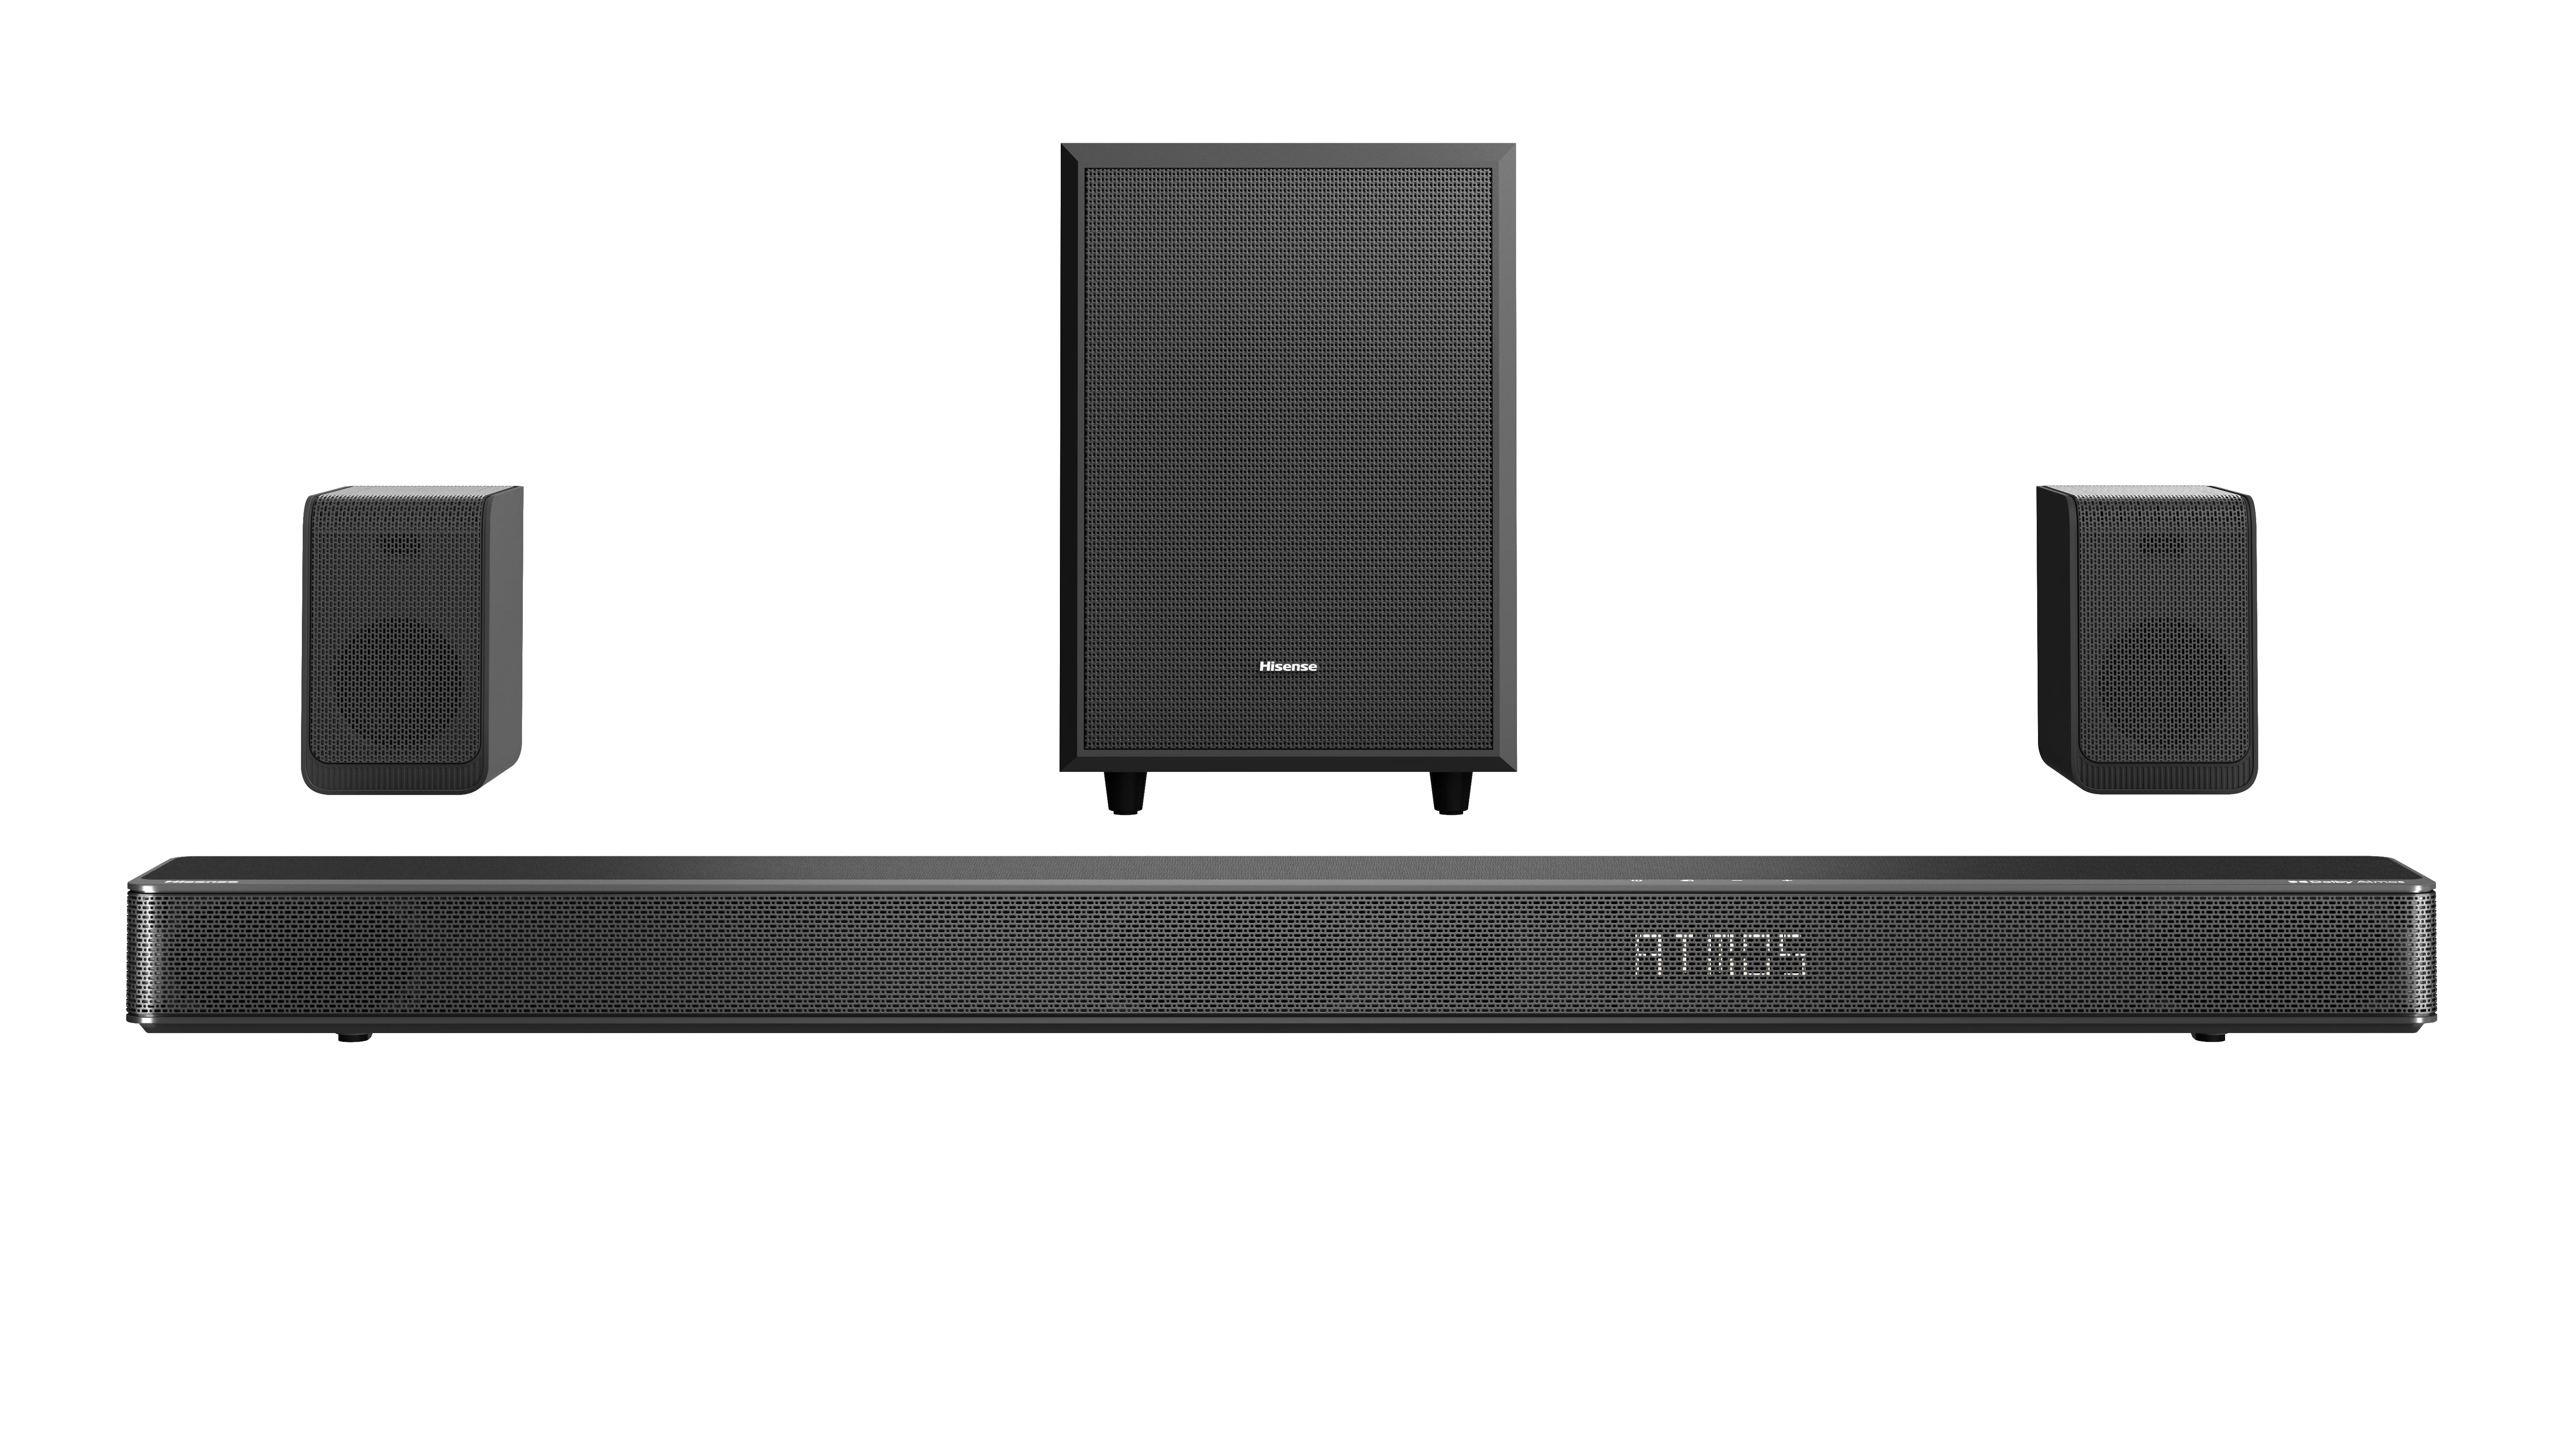 Hisense AX5125H 5.1.2 Dolby ATMOS Soundbar with Wireless Rear Speakers & Wireless Subwoofer